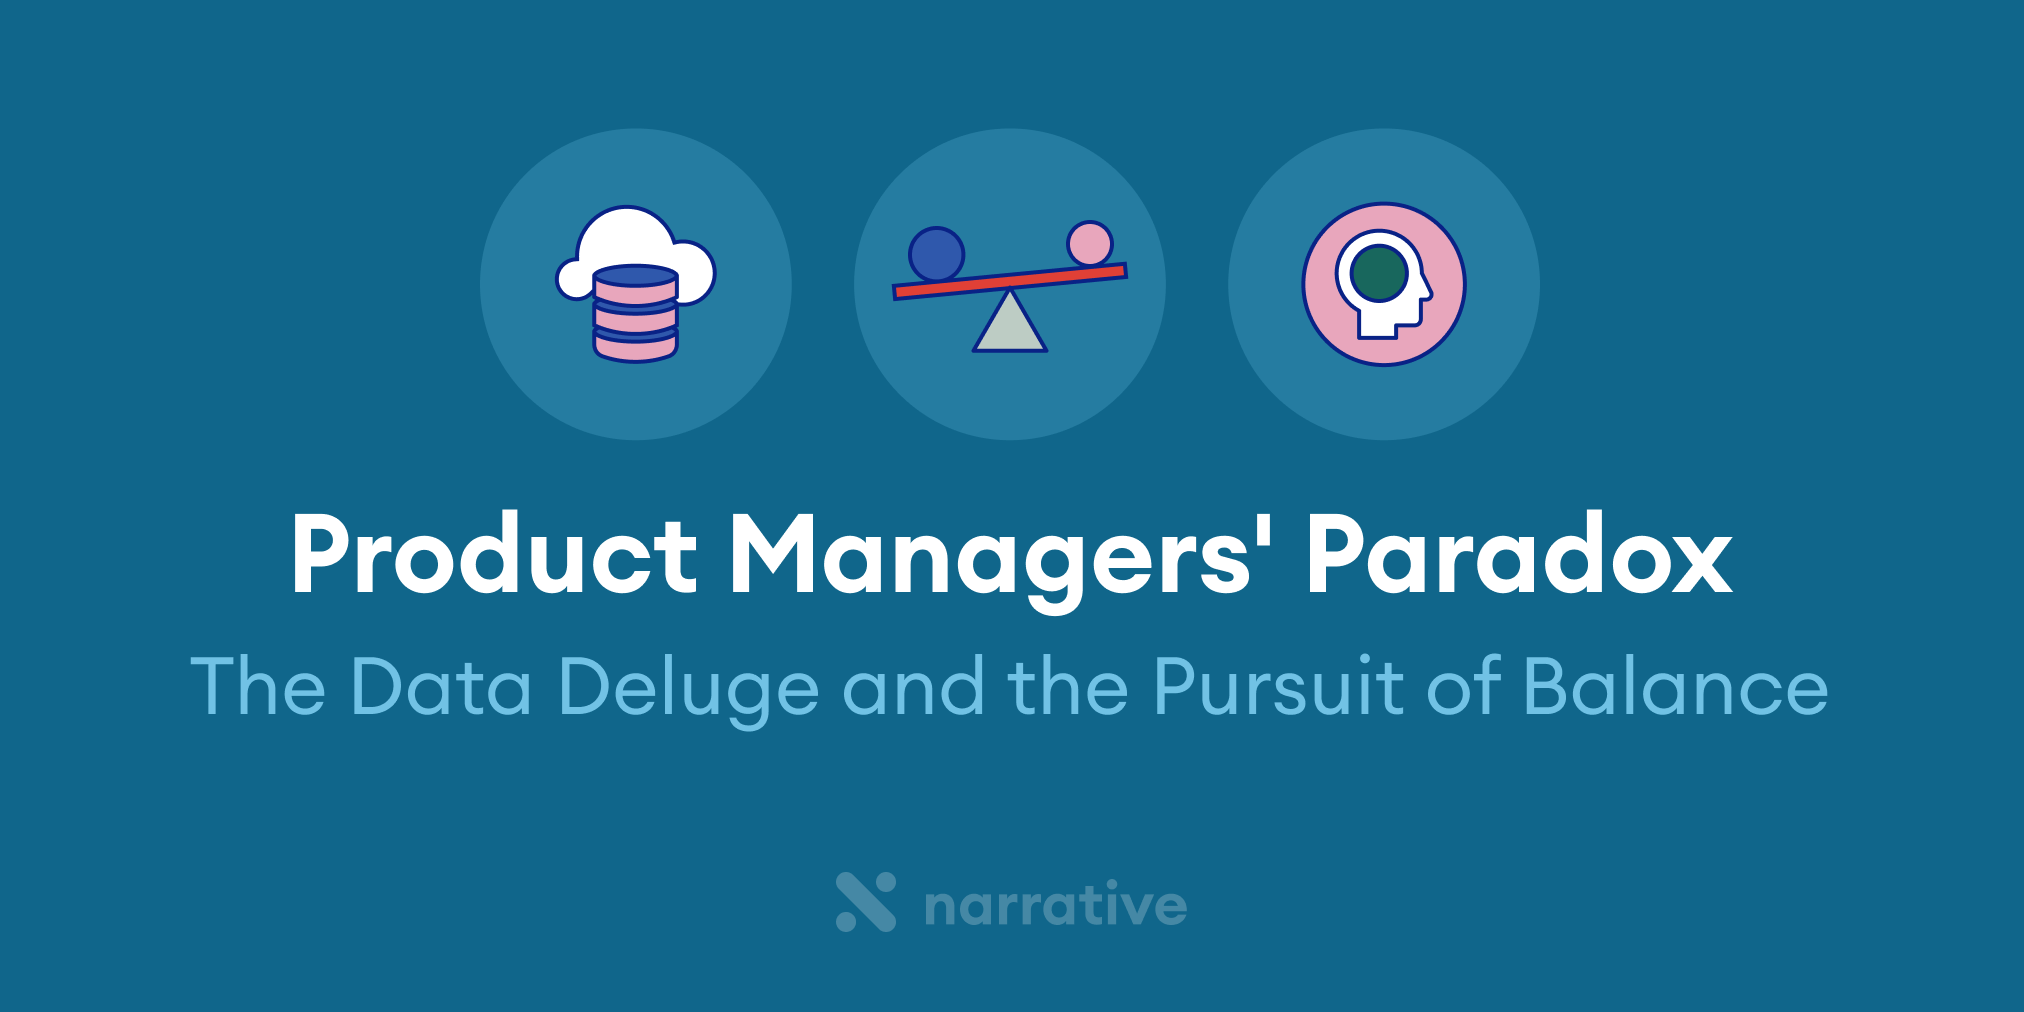 Product Managers' Paradox: The Data Deluge and the Pursuit of Balance